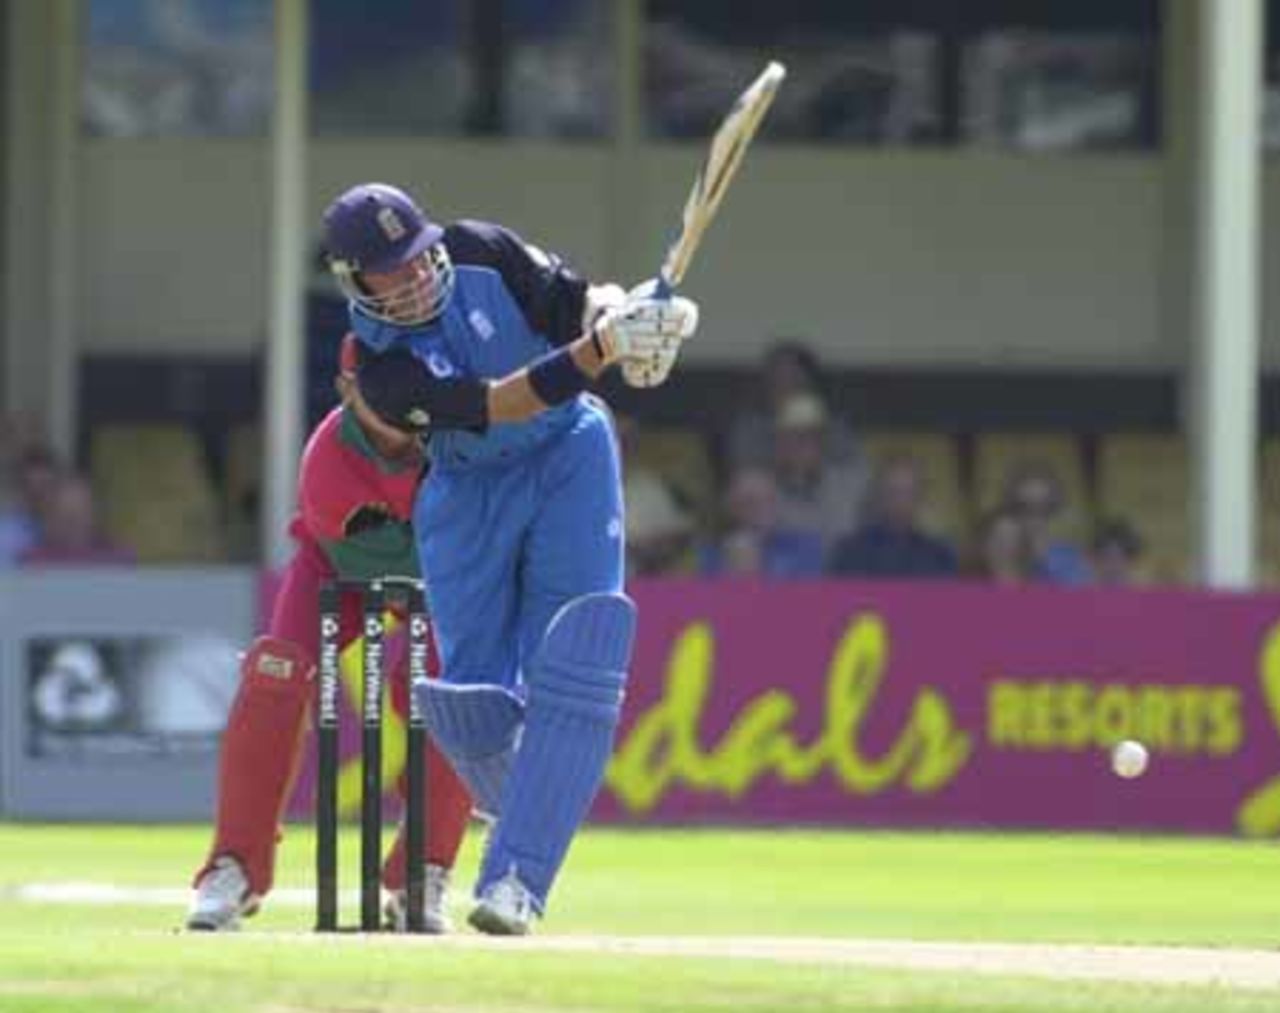 In the ODI match in the Nat West series at Birmingham 2000